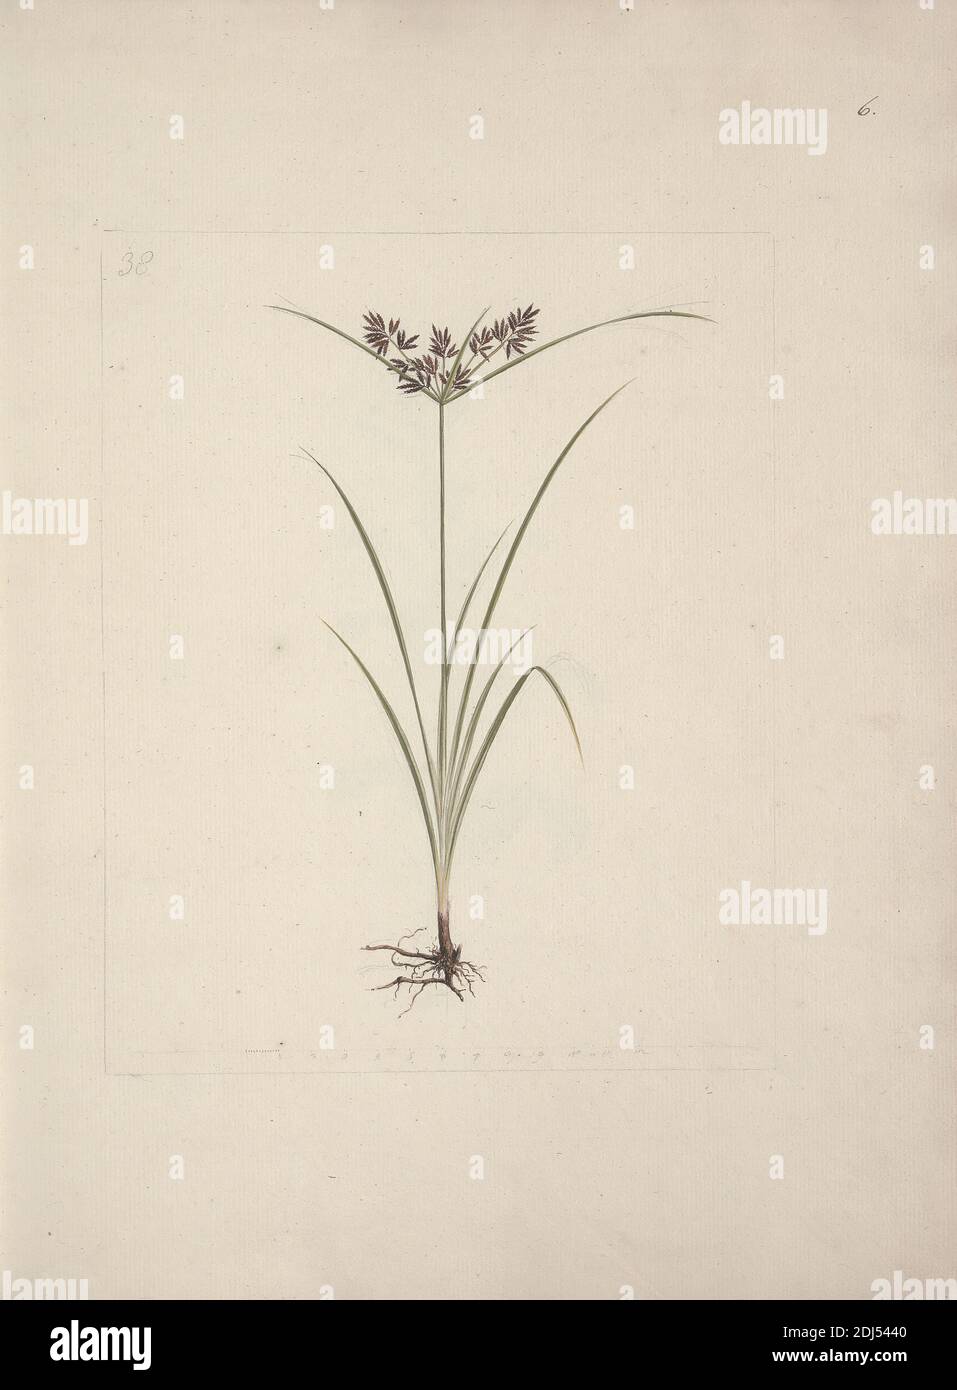 Cyperus esculentus L. (Tiger Nut): finished drawing of whole plant with roots, Luigi Balugani, 1737–1770, Italian, undated, Watercolor and graphite on medium, slightly textured, cream laid paper, Sheet: 15 15/16 × 12 5/16 inches (40.5 × 31.3 cm) and Binding: 16 1/4 inches (41.3 cm Stock Photo